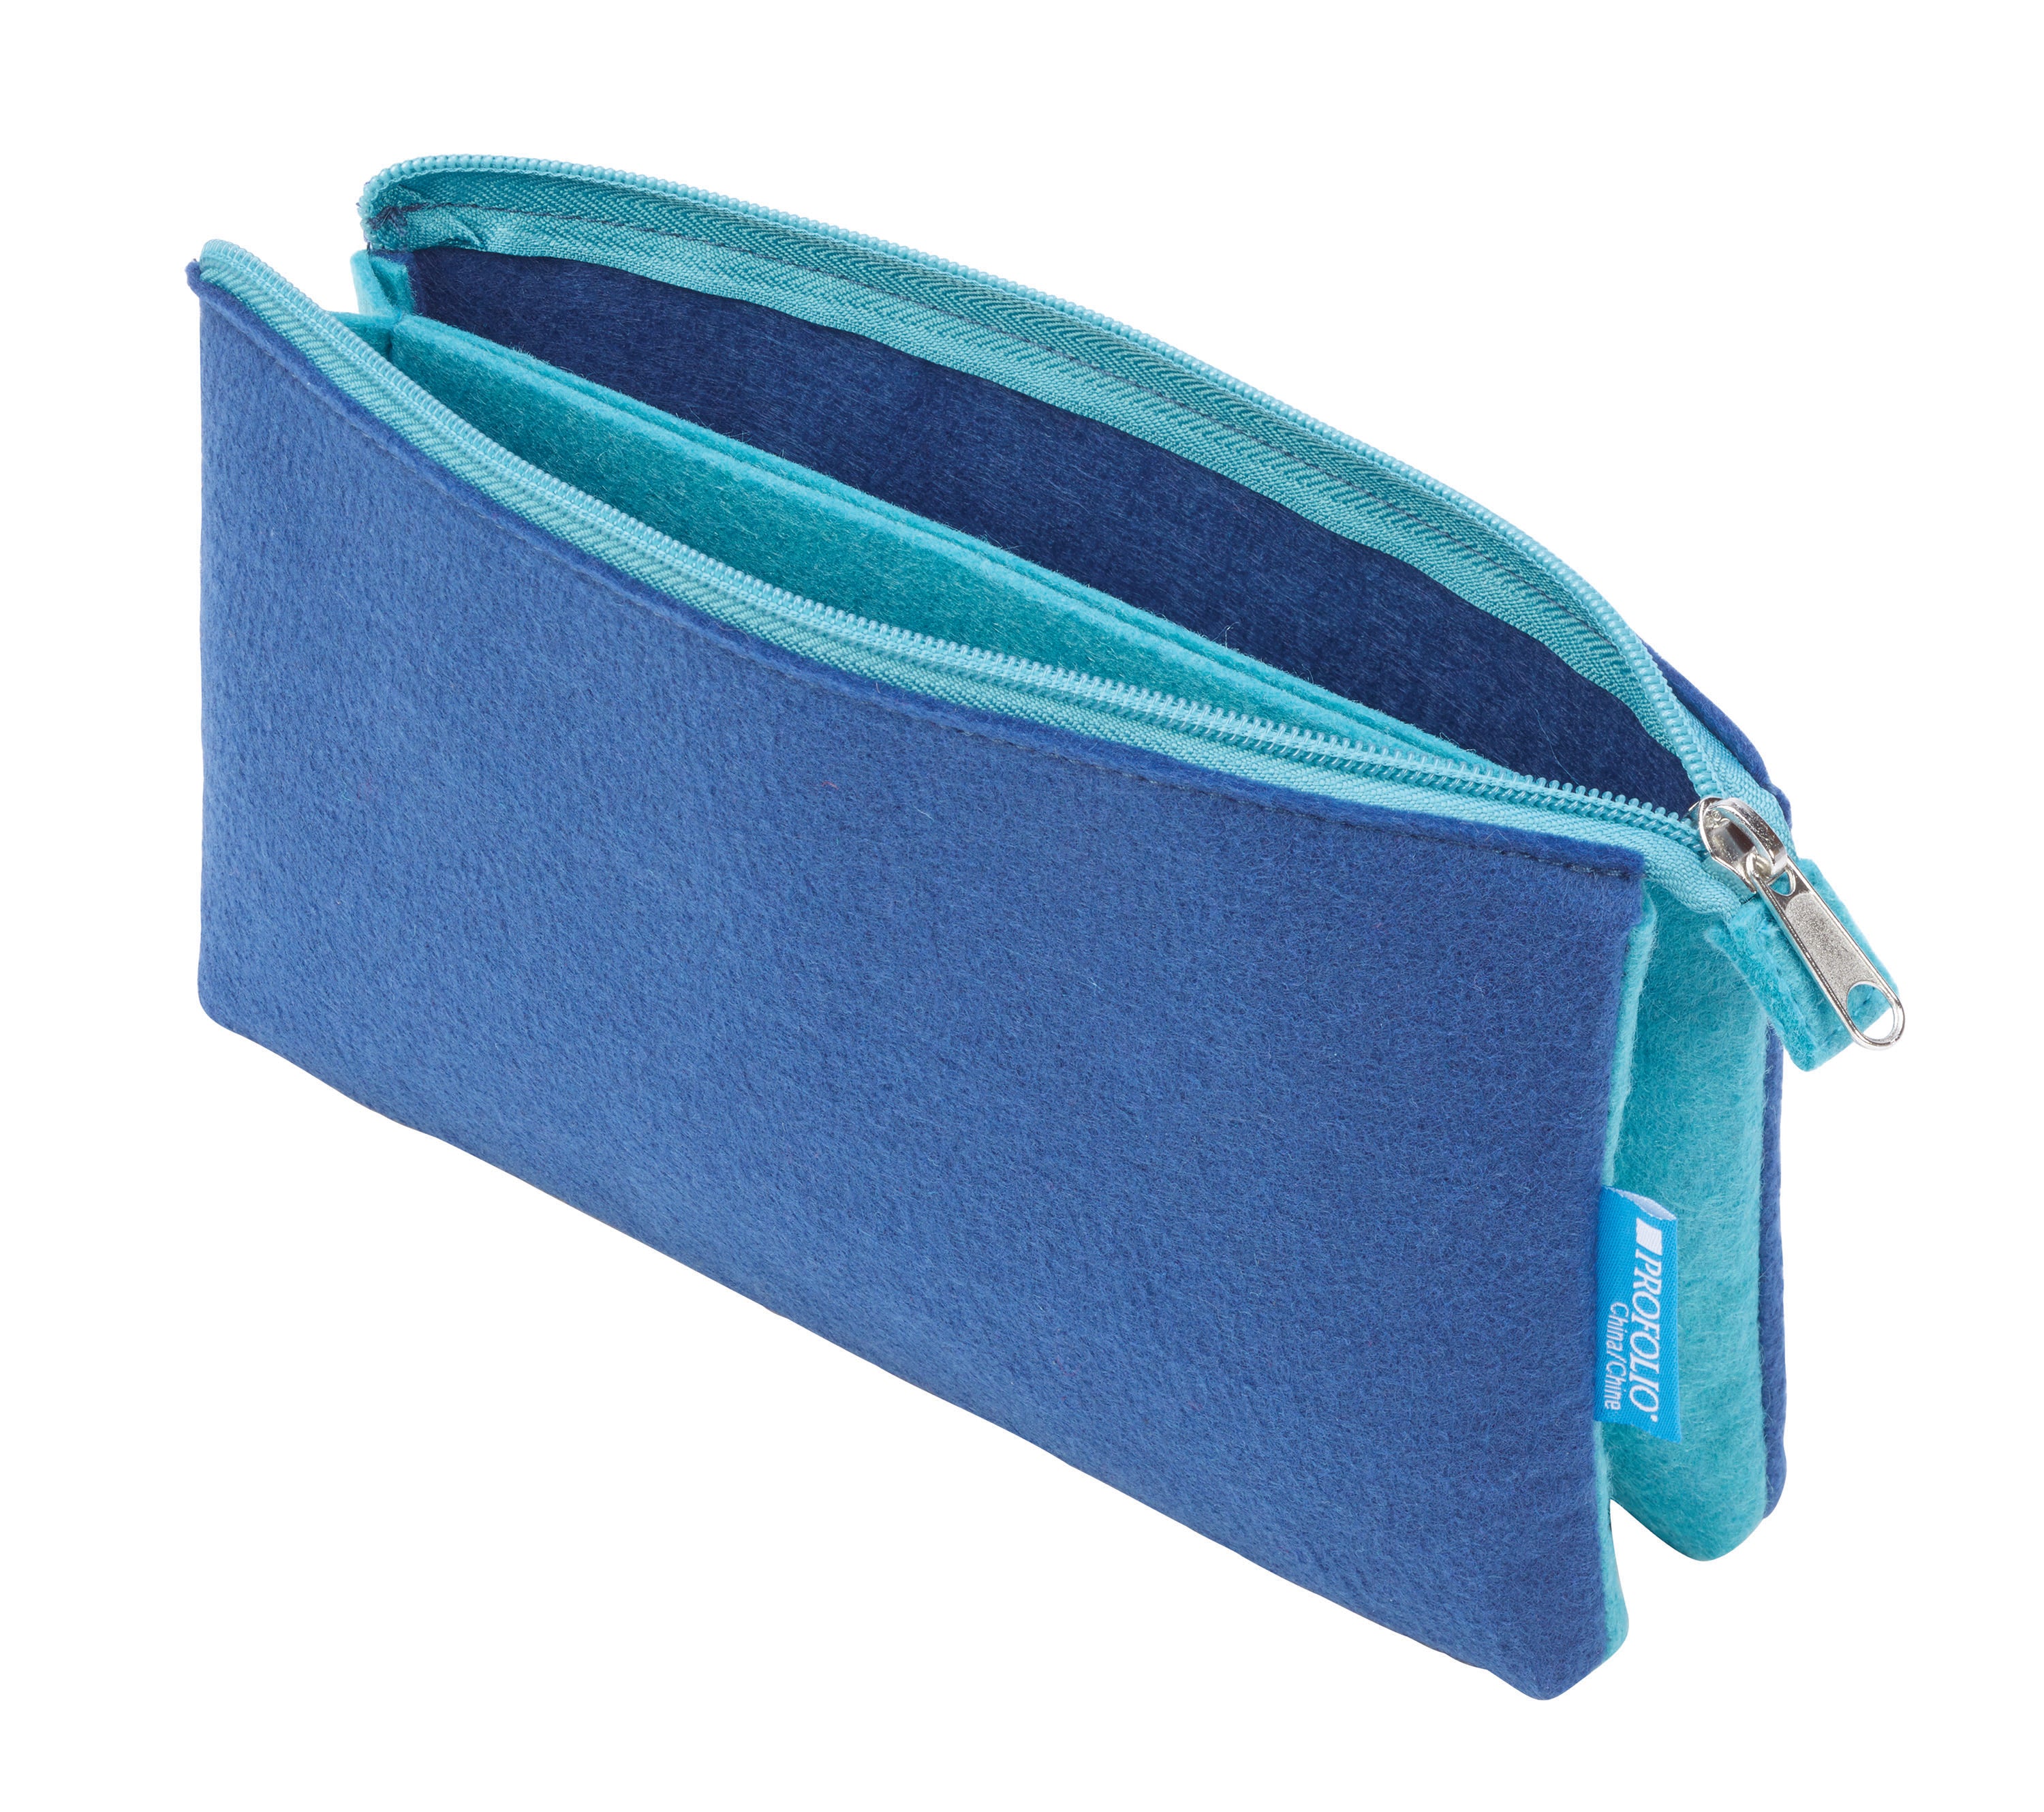 Itoya Profolio Midtown Pouch in Blue/Lagoon- 5x9 inches